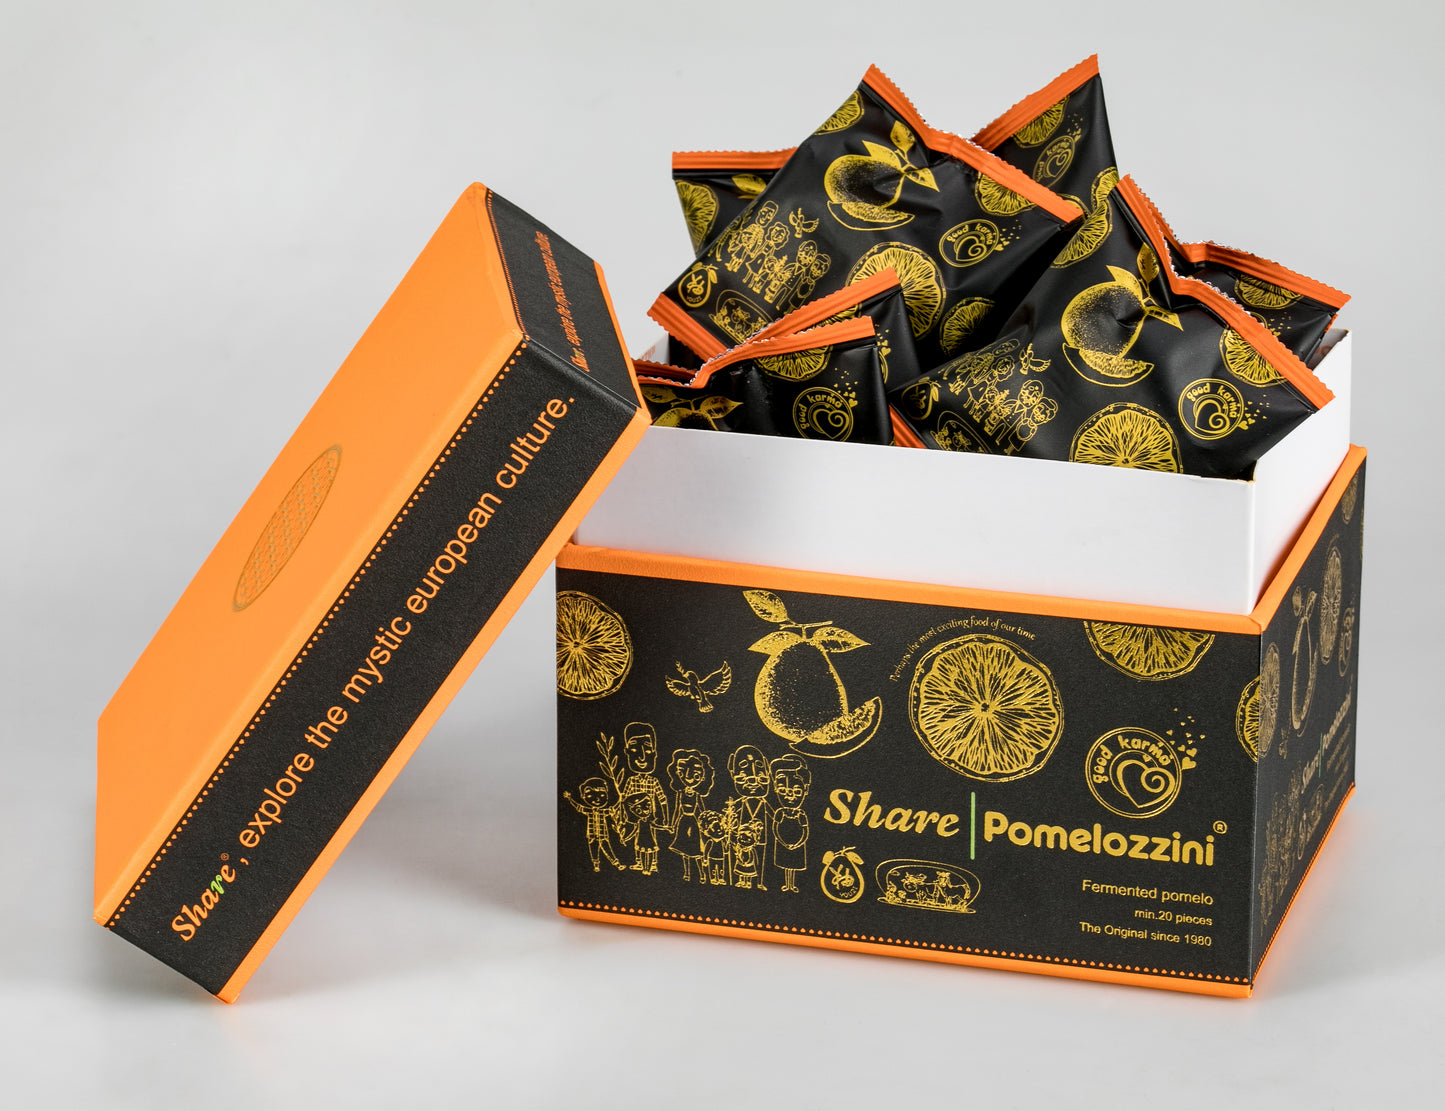 Share Pomelozzini® (500g Box): 30+ month fermented Pomelo (made in Switzerland, free shipping)